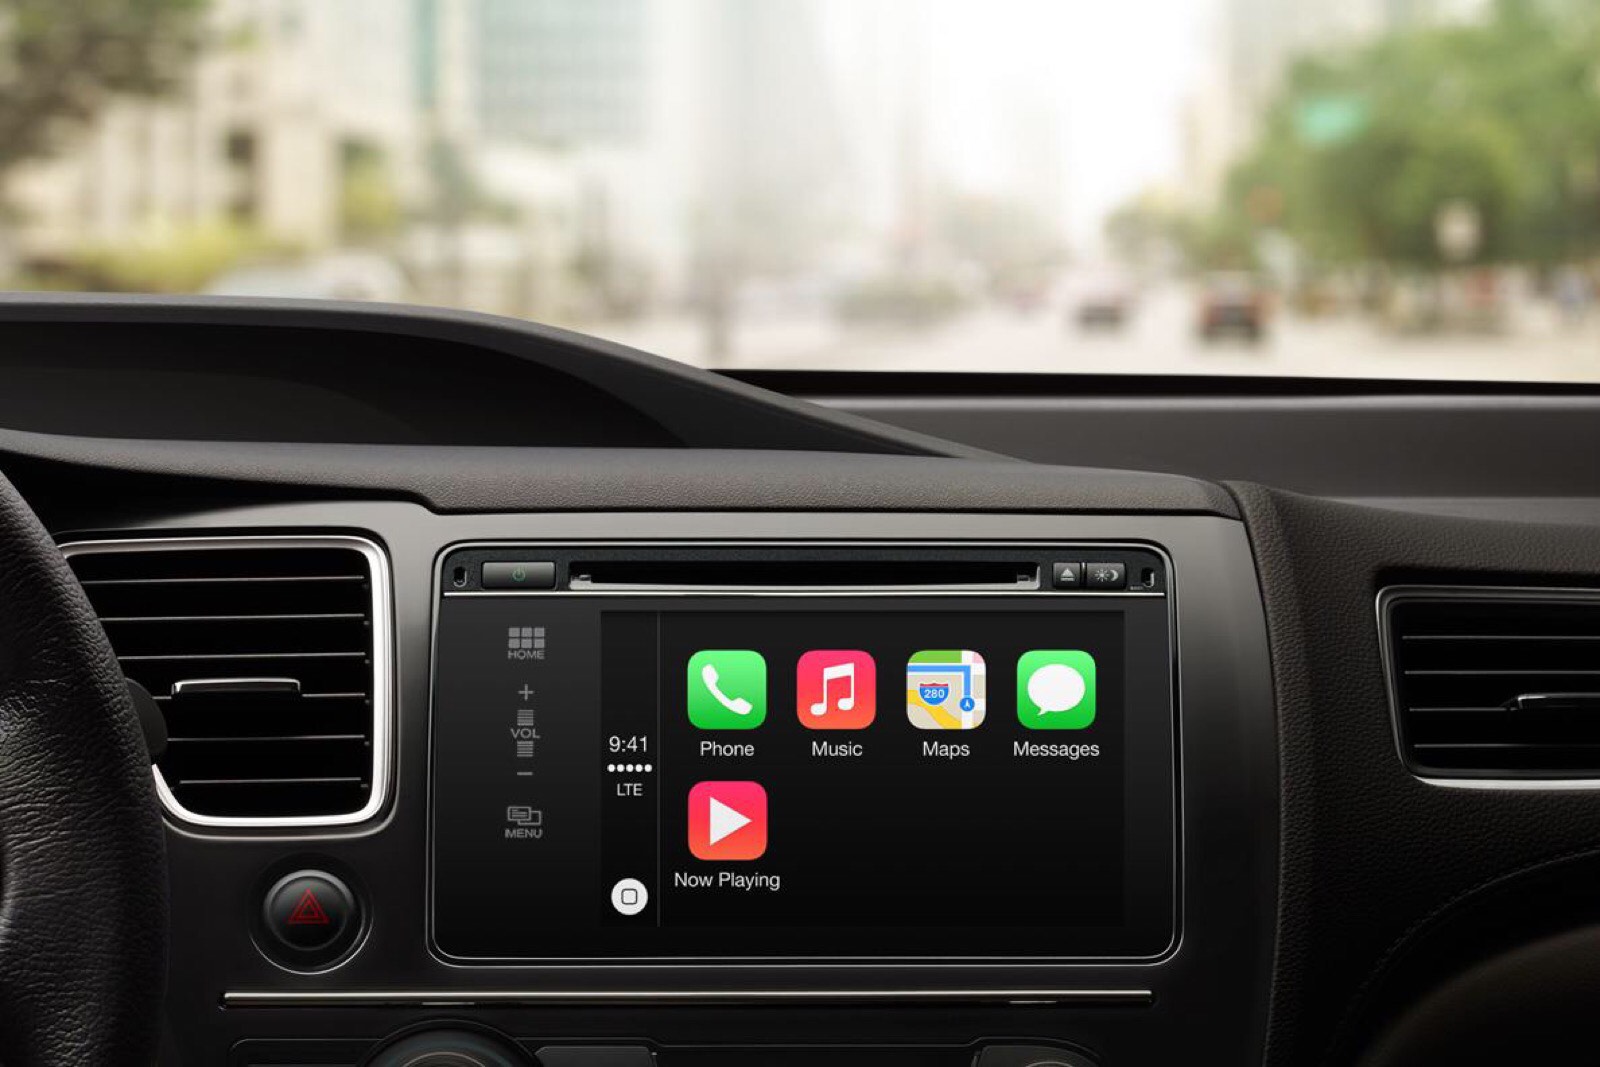 Ford CarPlay is here for 2016 models.